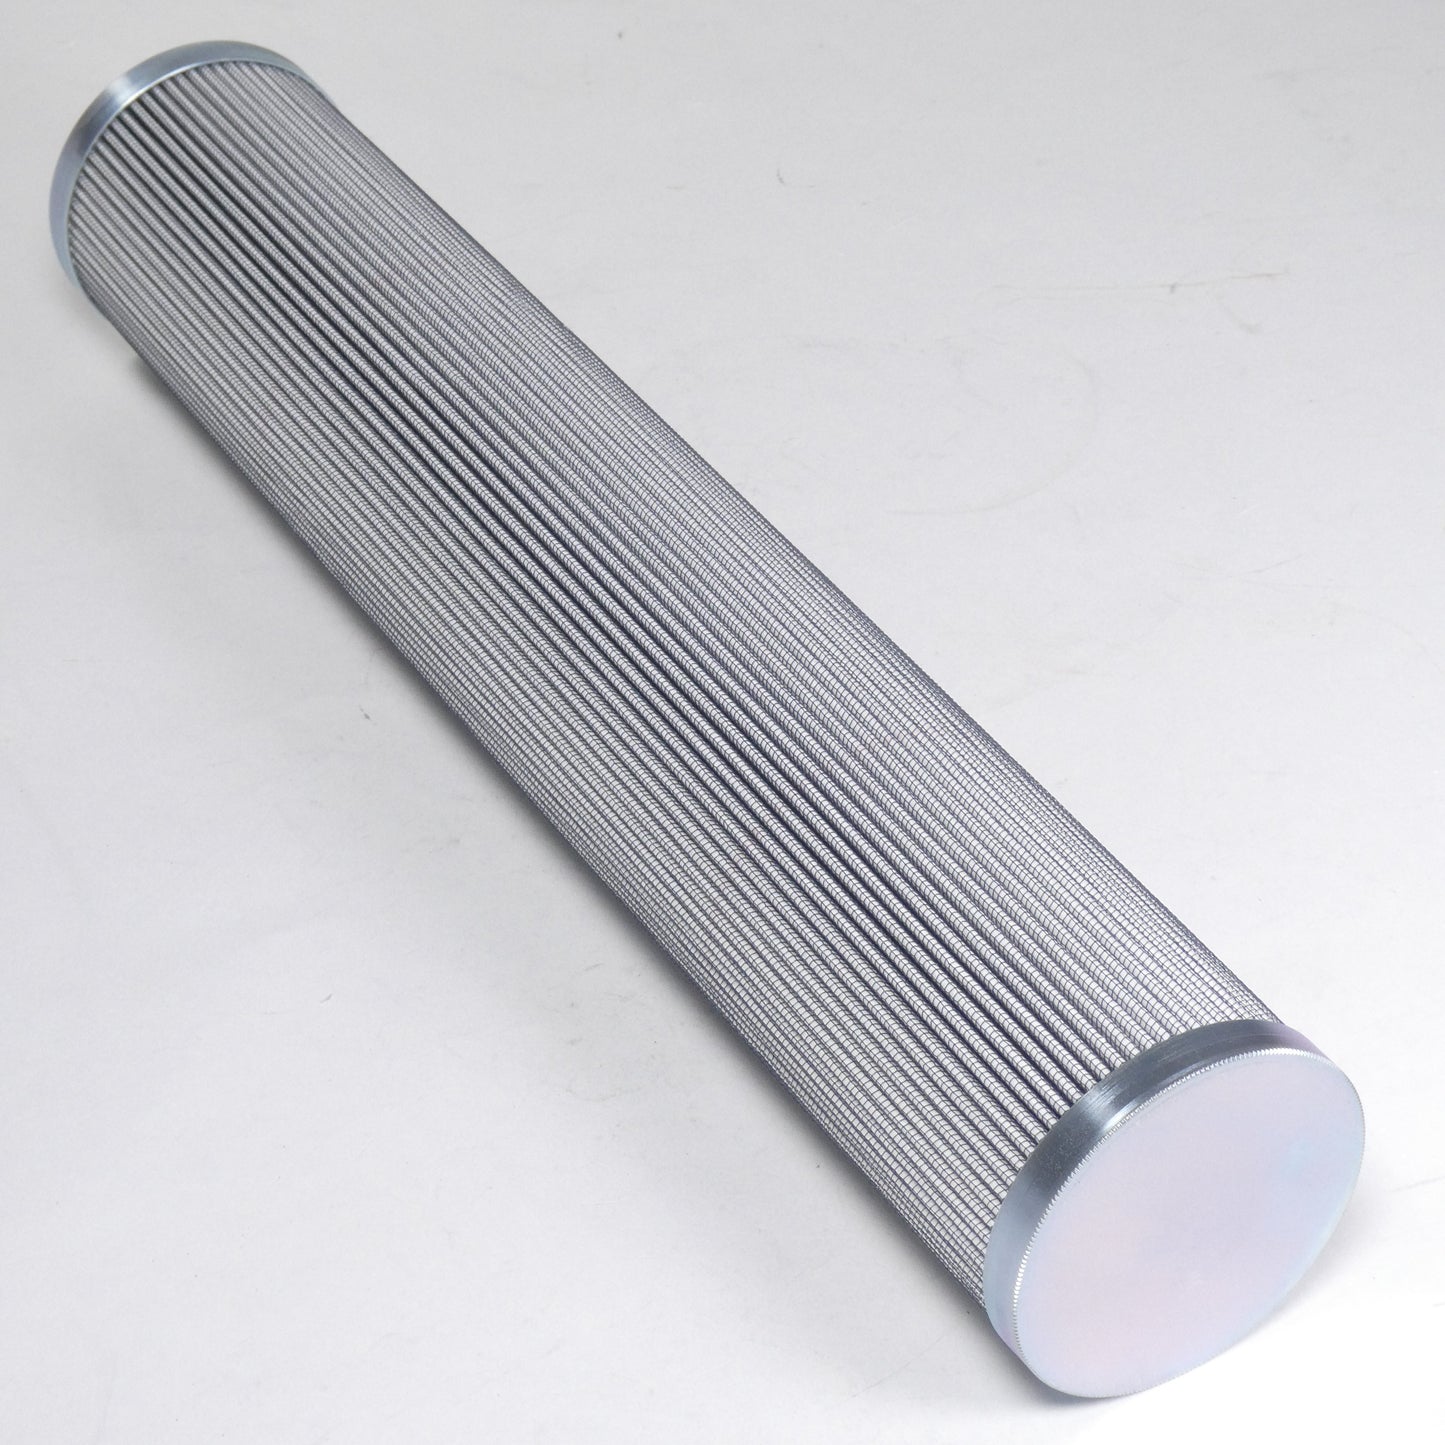 Hydrafil Replacement Filter Element for Filtersoft H9616MDB-A2